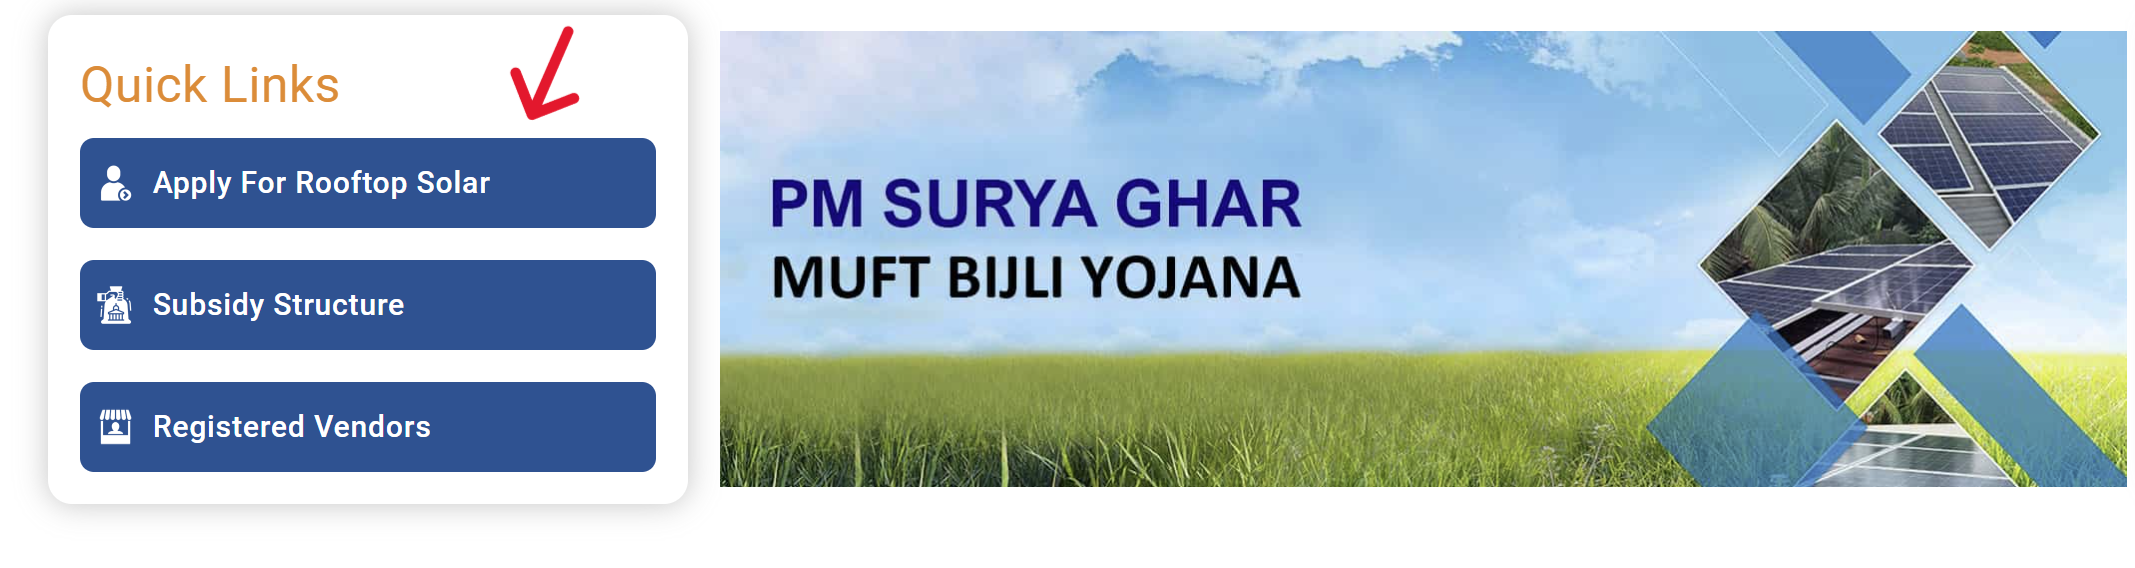 PM Surya Ghar Official Portal - Apply For Solar Rooftop Option On Homepage